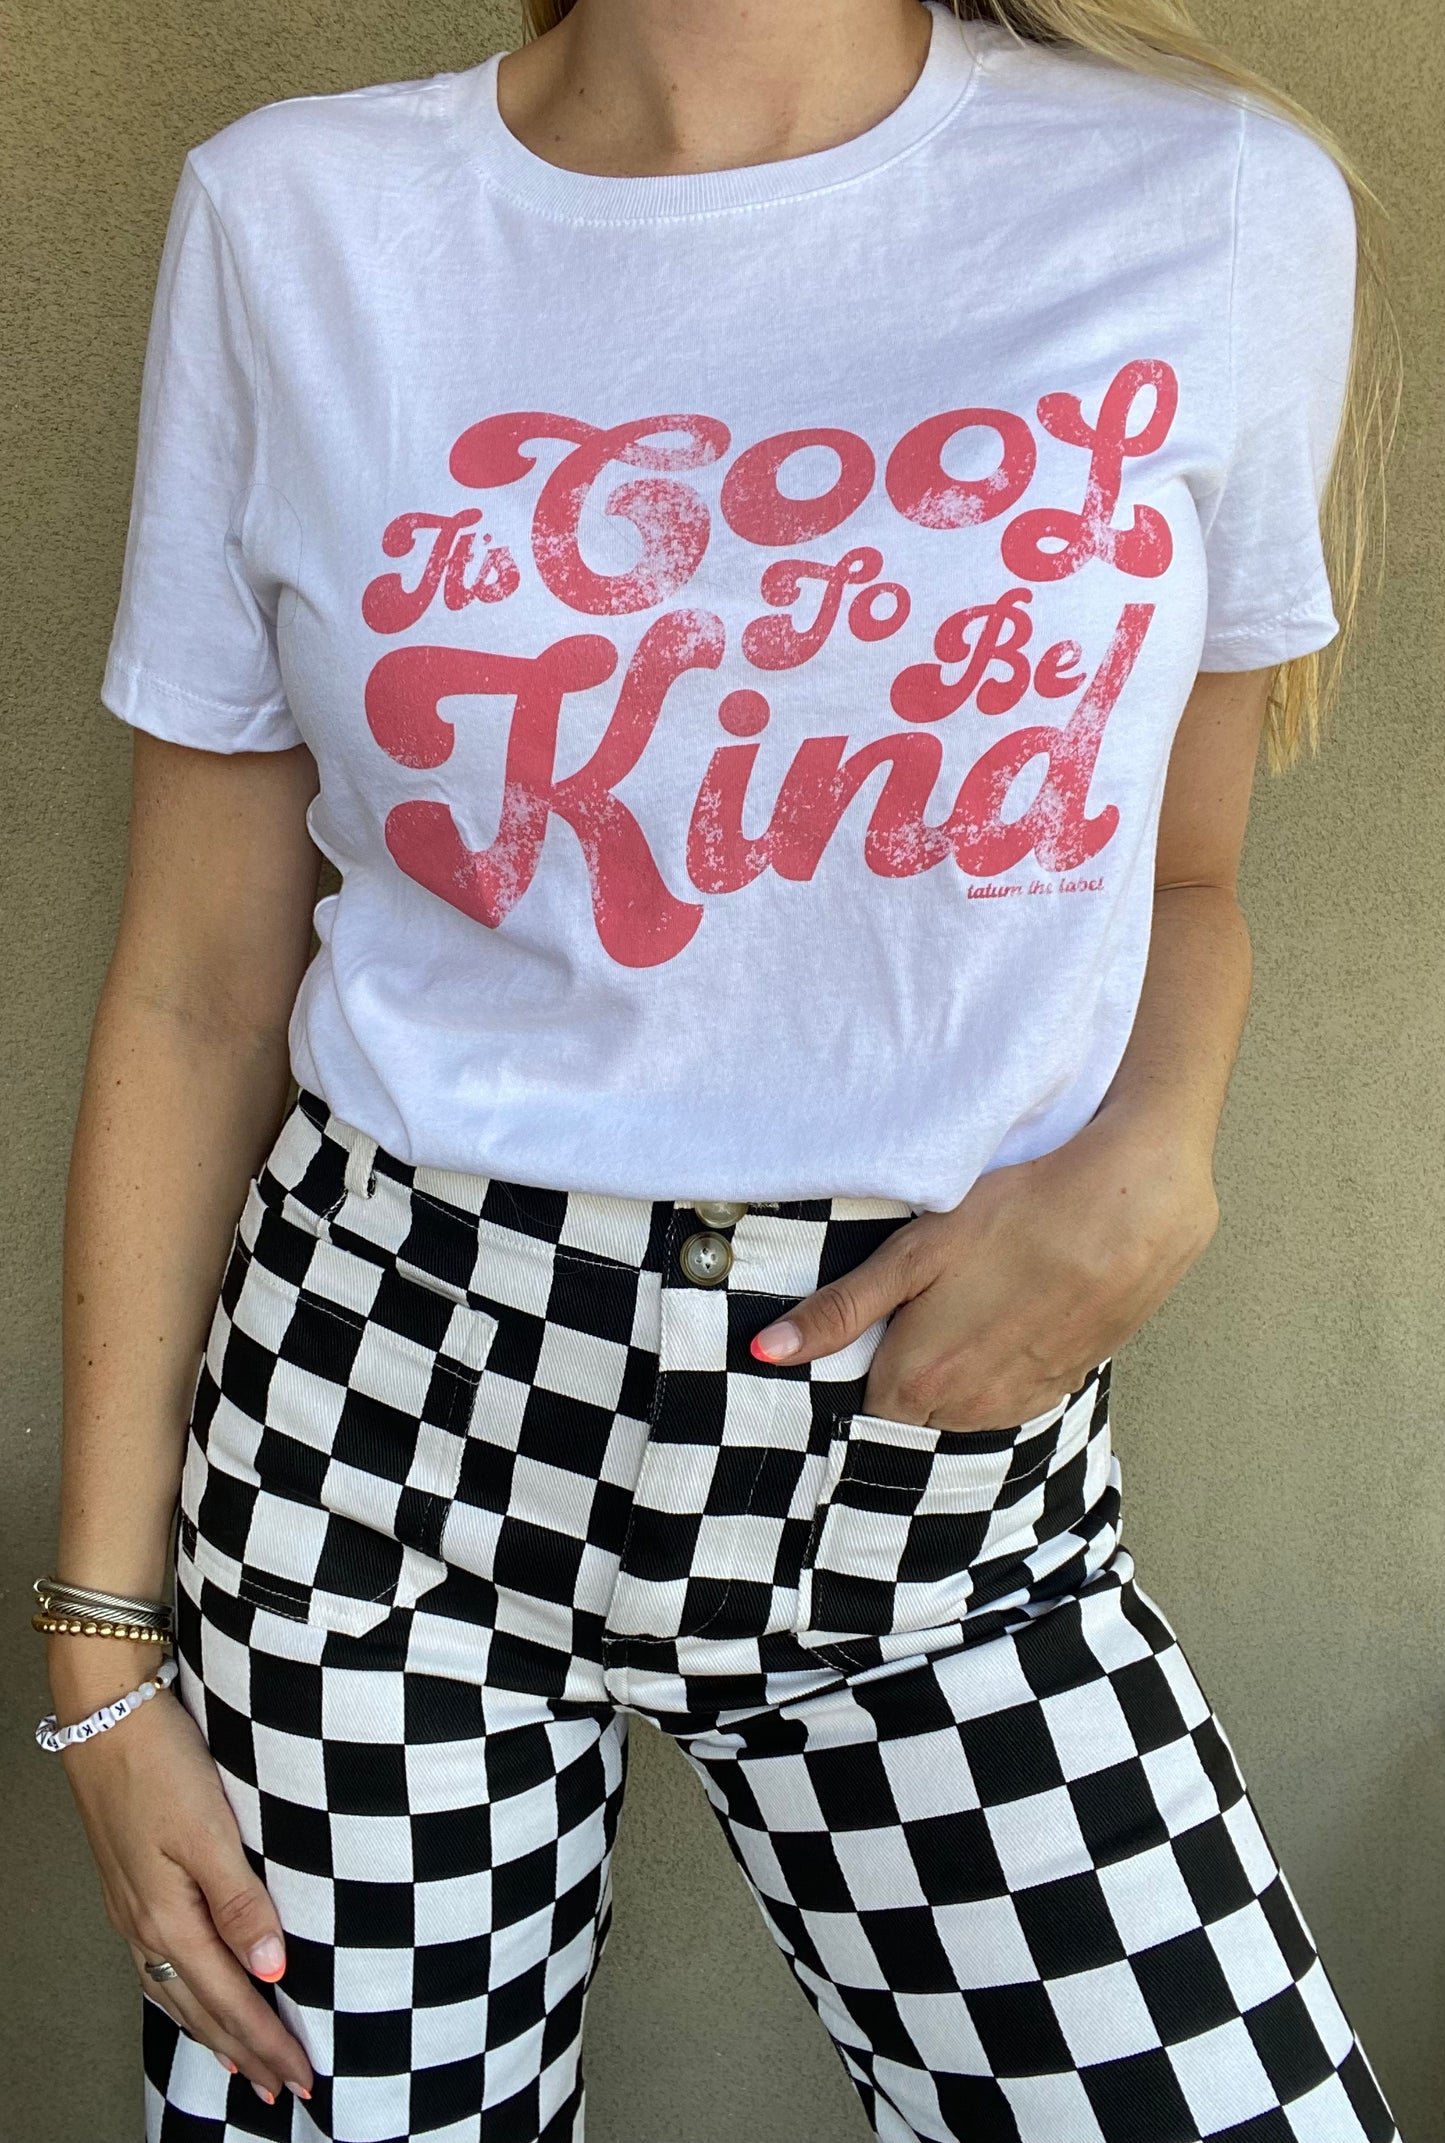 IT'S COOL TO BE KIND TEE